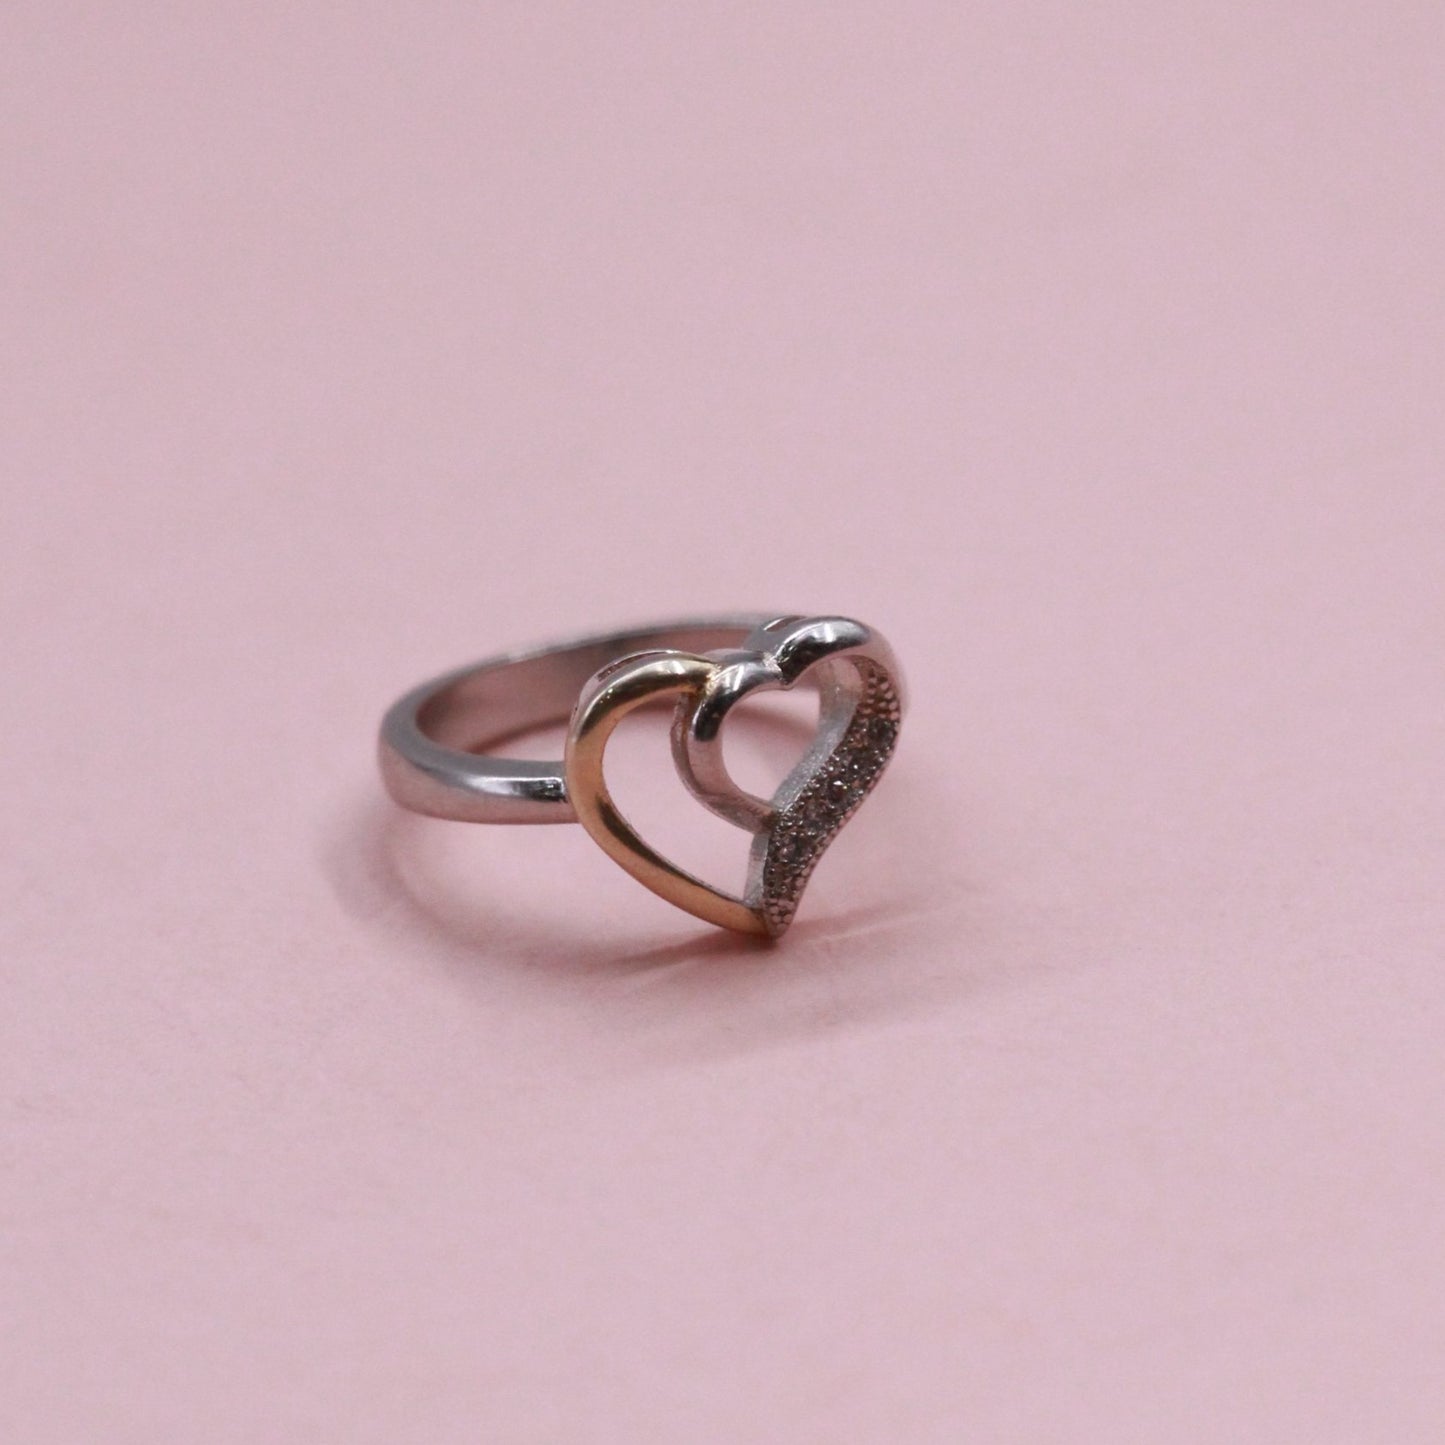 Hearts of Hearts Silver Ring